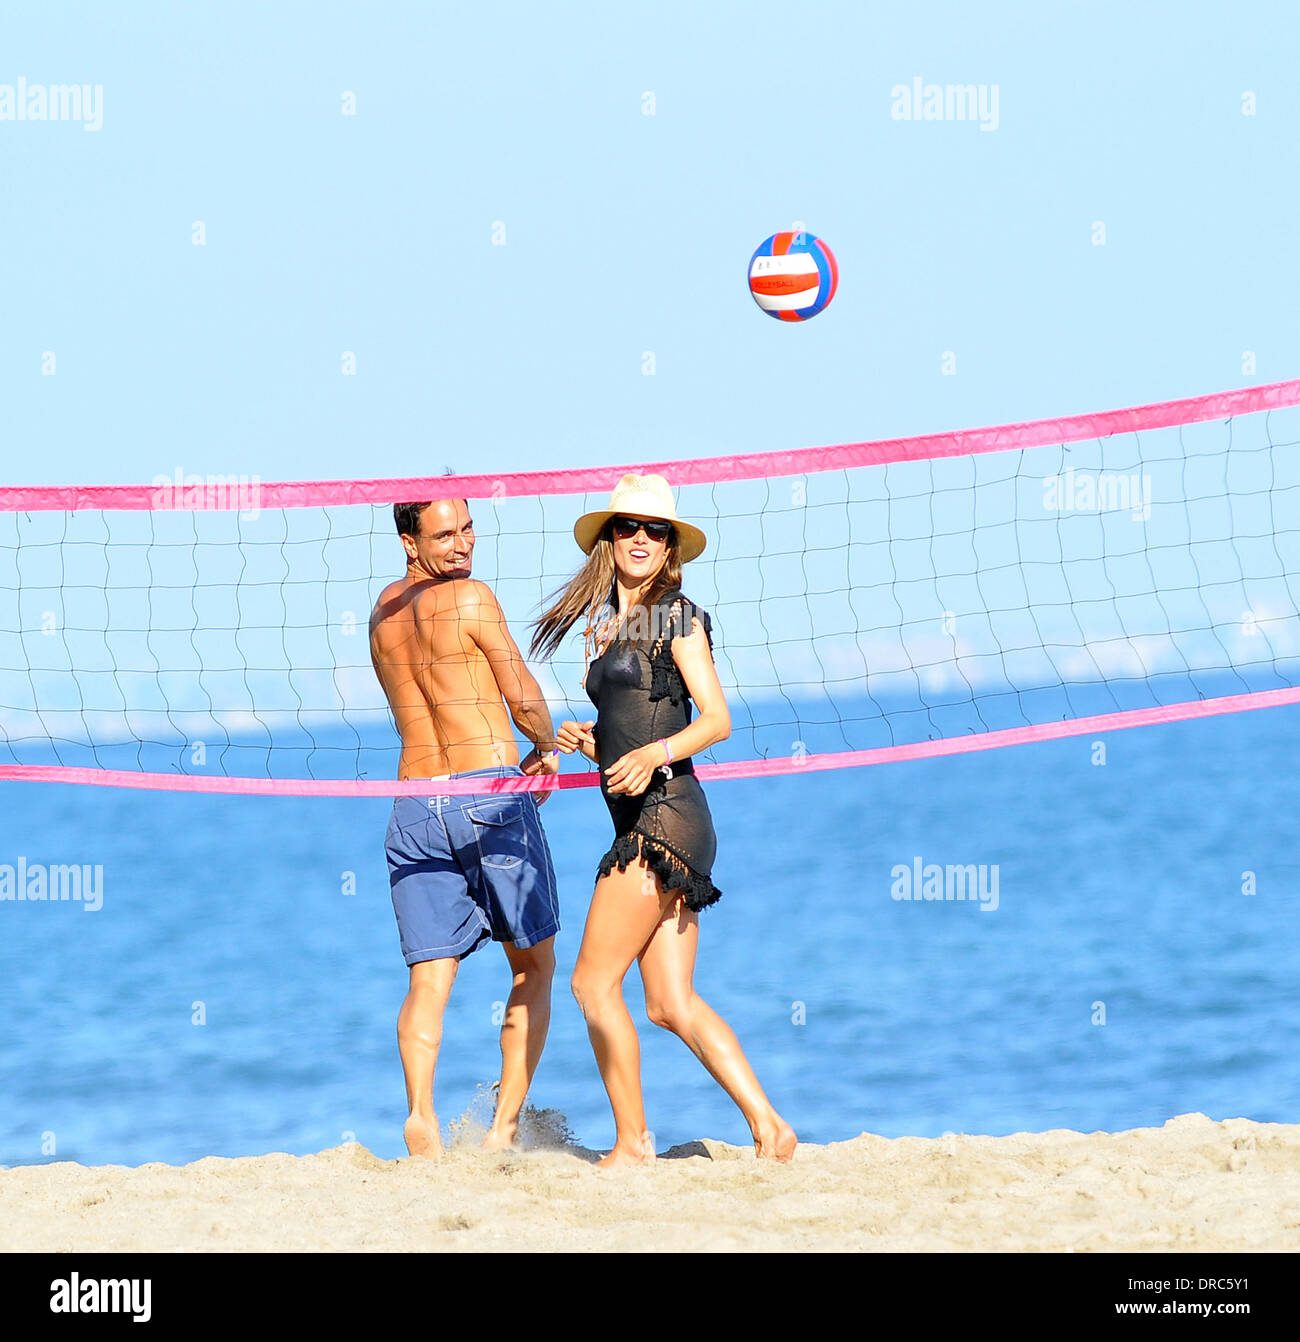 Alessandra Ambrosio wearing a straw hat while playing volleyball with friends on Malibu beach  Los Angeles, California - 15.07.12 Stock Photo